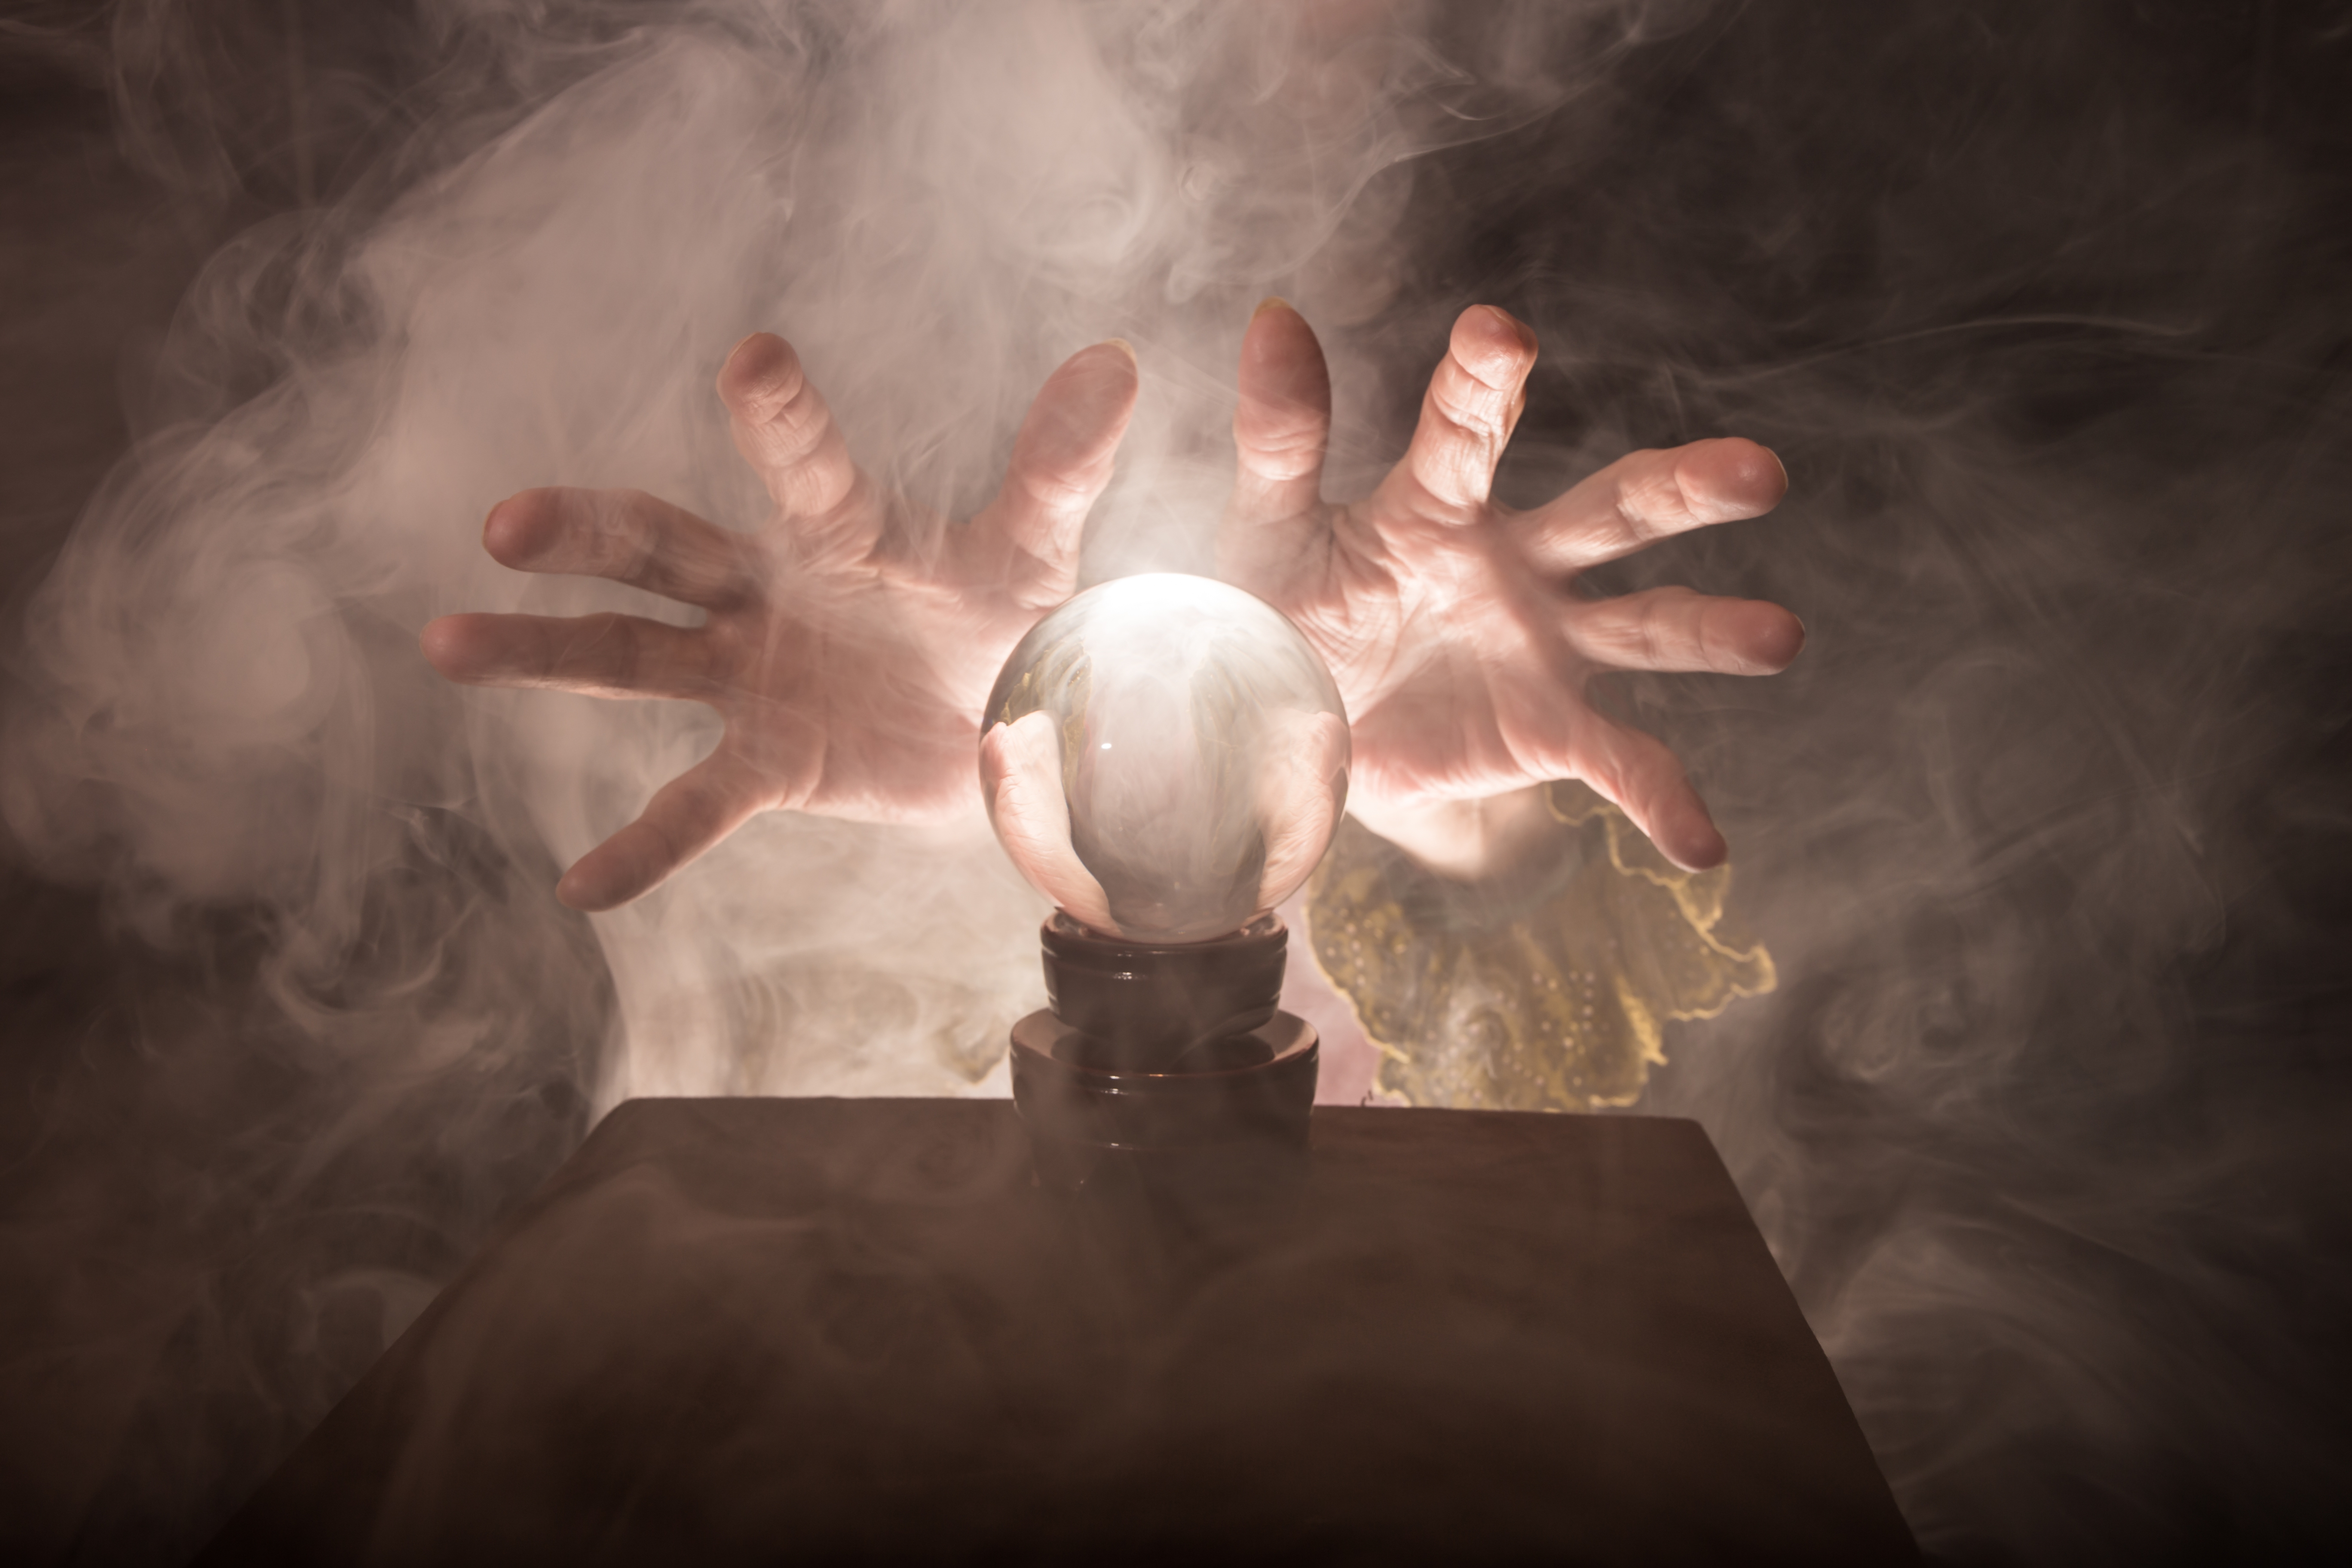 Someone holding their hands above a crystal ball in a smoky room.